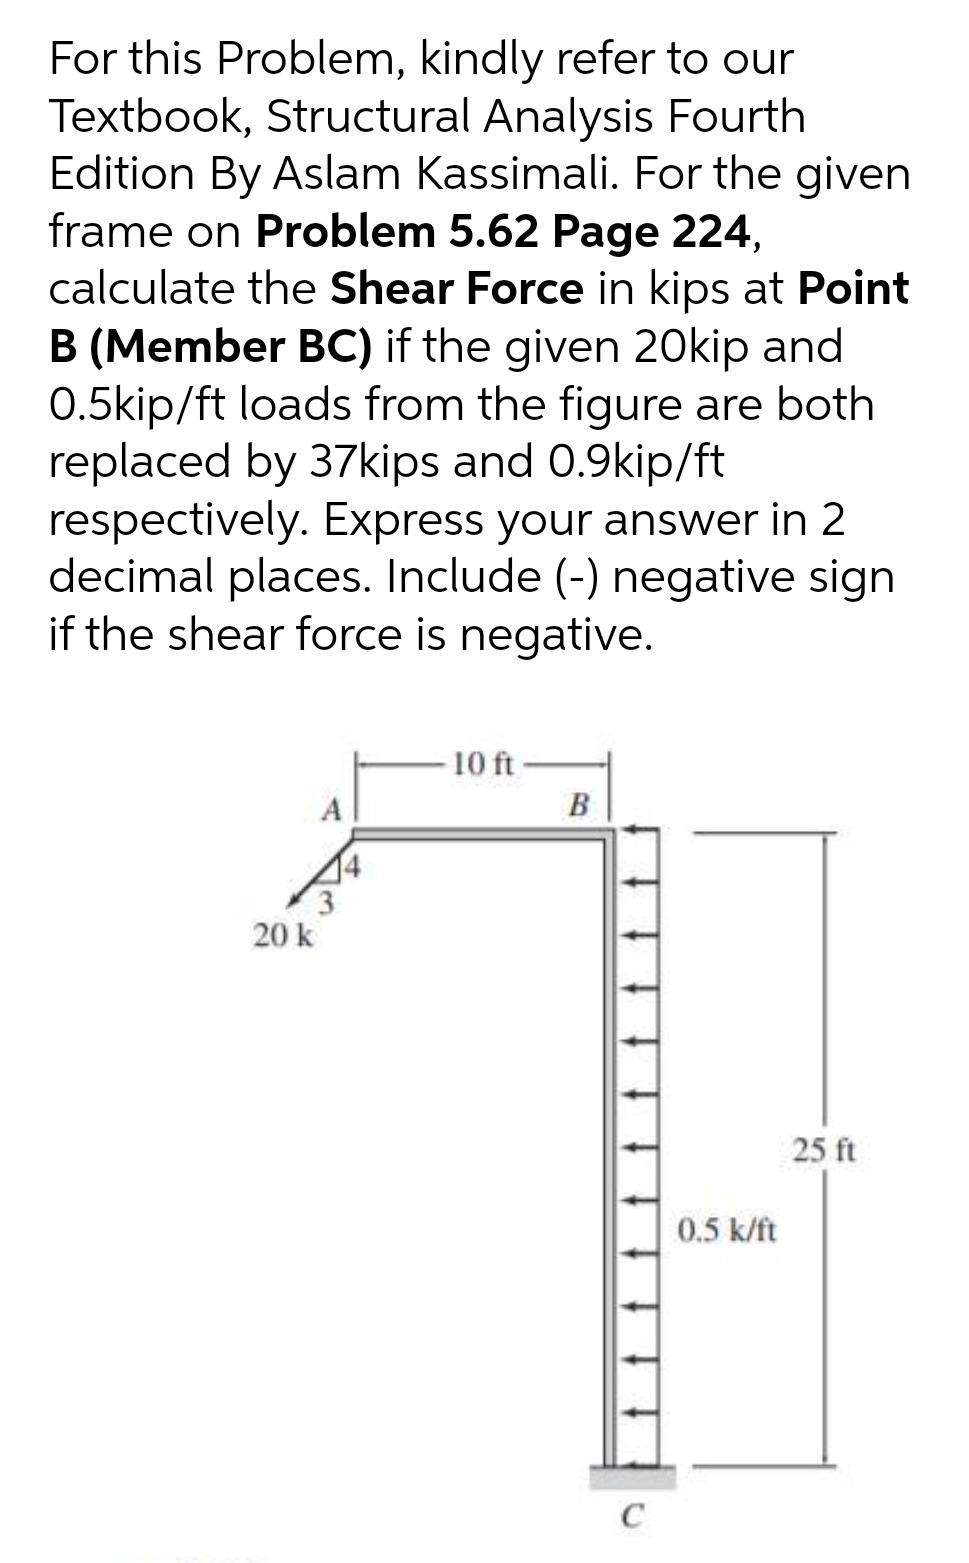 For this Problem, kindly refer to our
Textbook, Structural Analysis Fourth
Edition By Aslam Kassimali. For the given
frame on Problem 5.62 Page 224,
calculate the Shear Force in kips at Point
B (Member BC) if the given 20Okip and
0.5kip/ft loads from the figure are both
replaced by 37kips and 0.9kip/ft
respectively. Express your answer in 2
decimal places. Include (-) negative sign
if the shear force is negative.
10 ft
A
B
20 k
25 ft
0.5 k/ft
